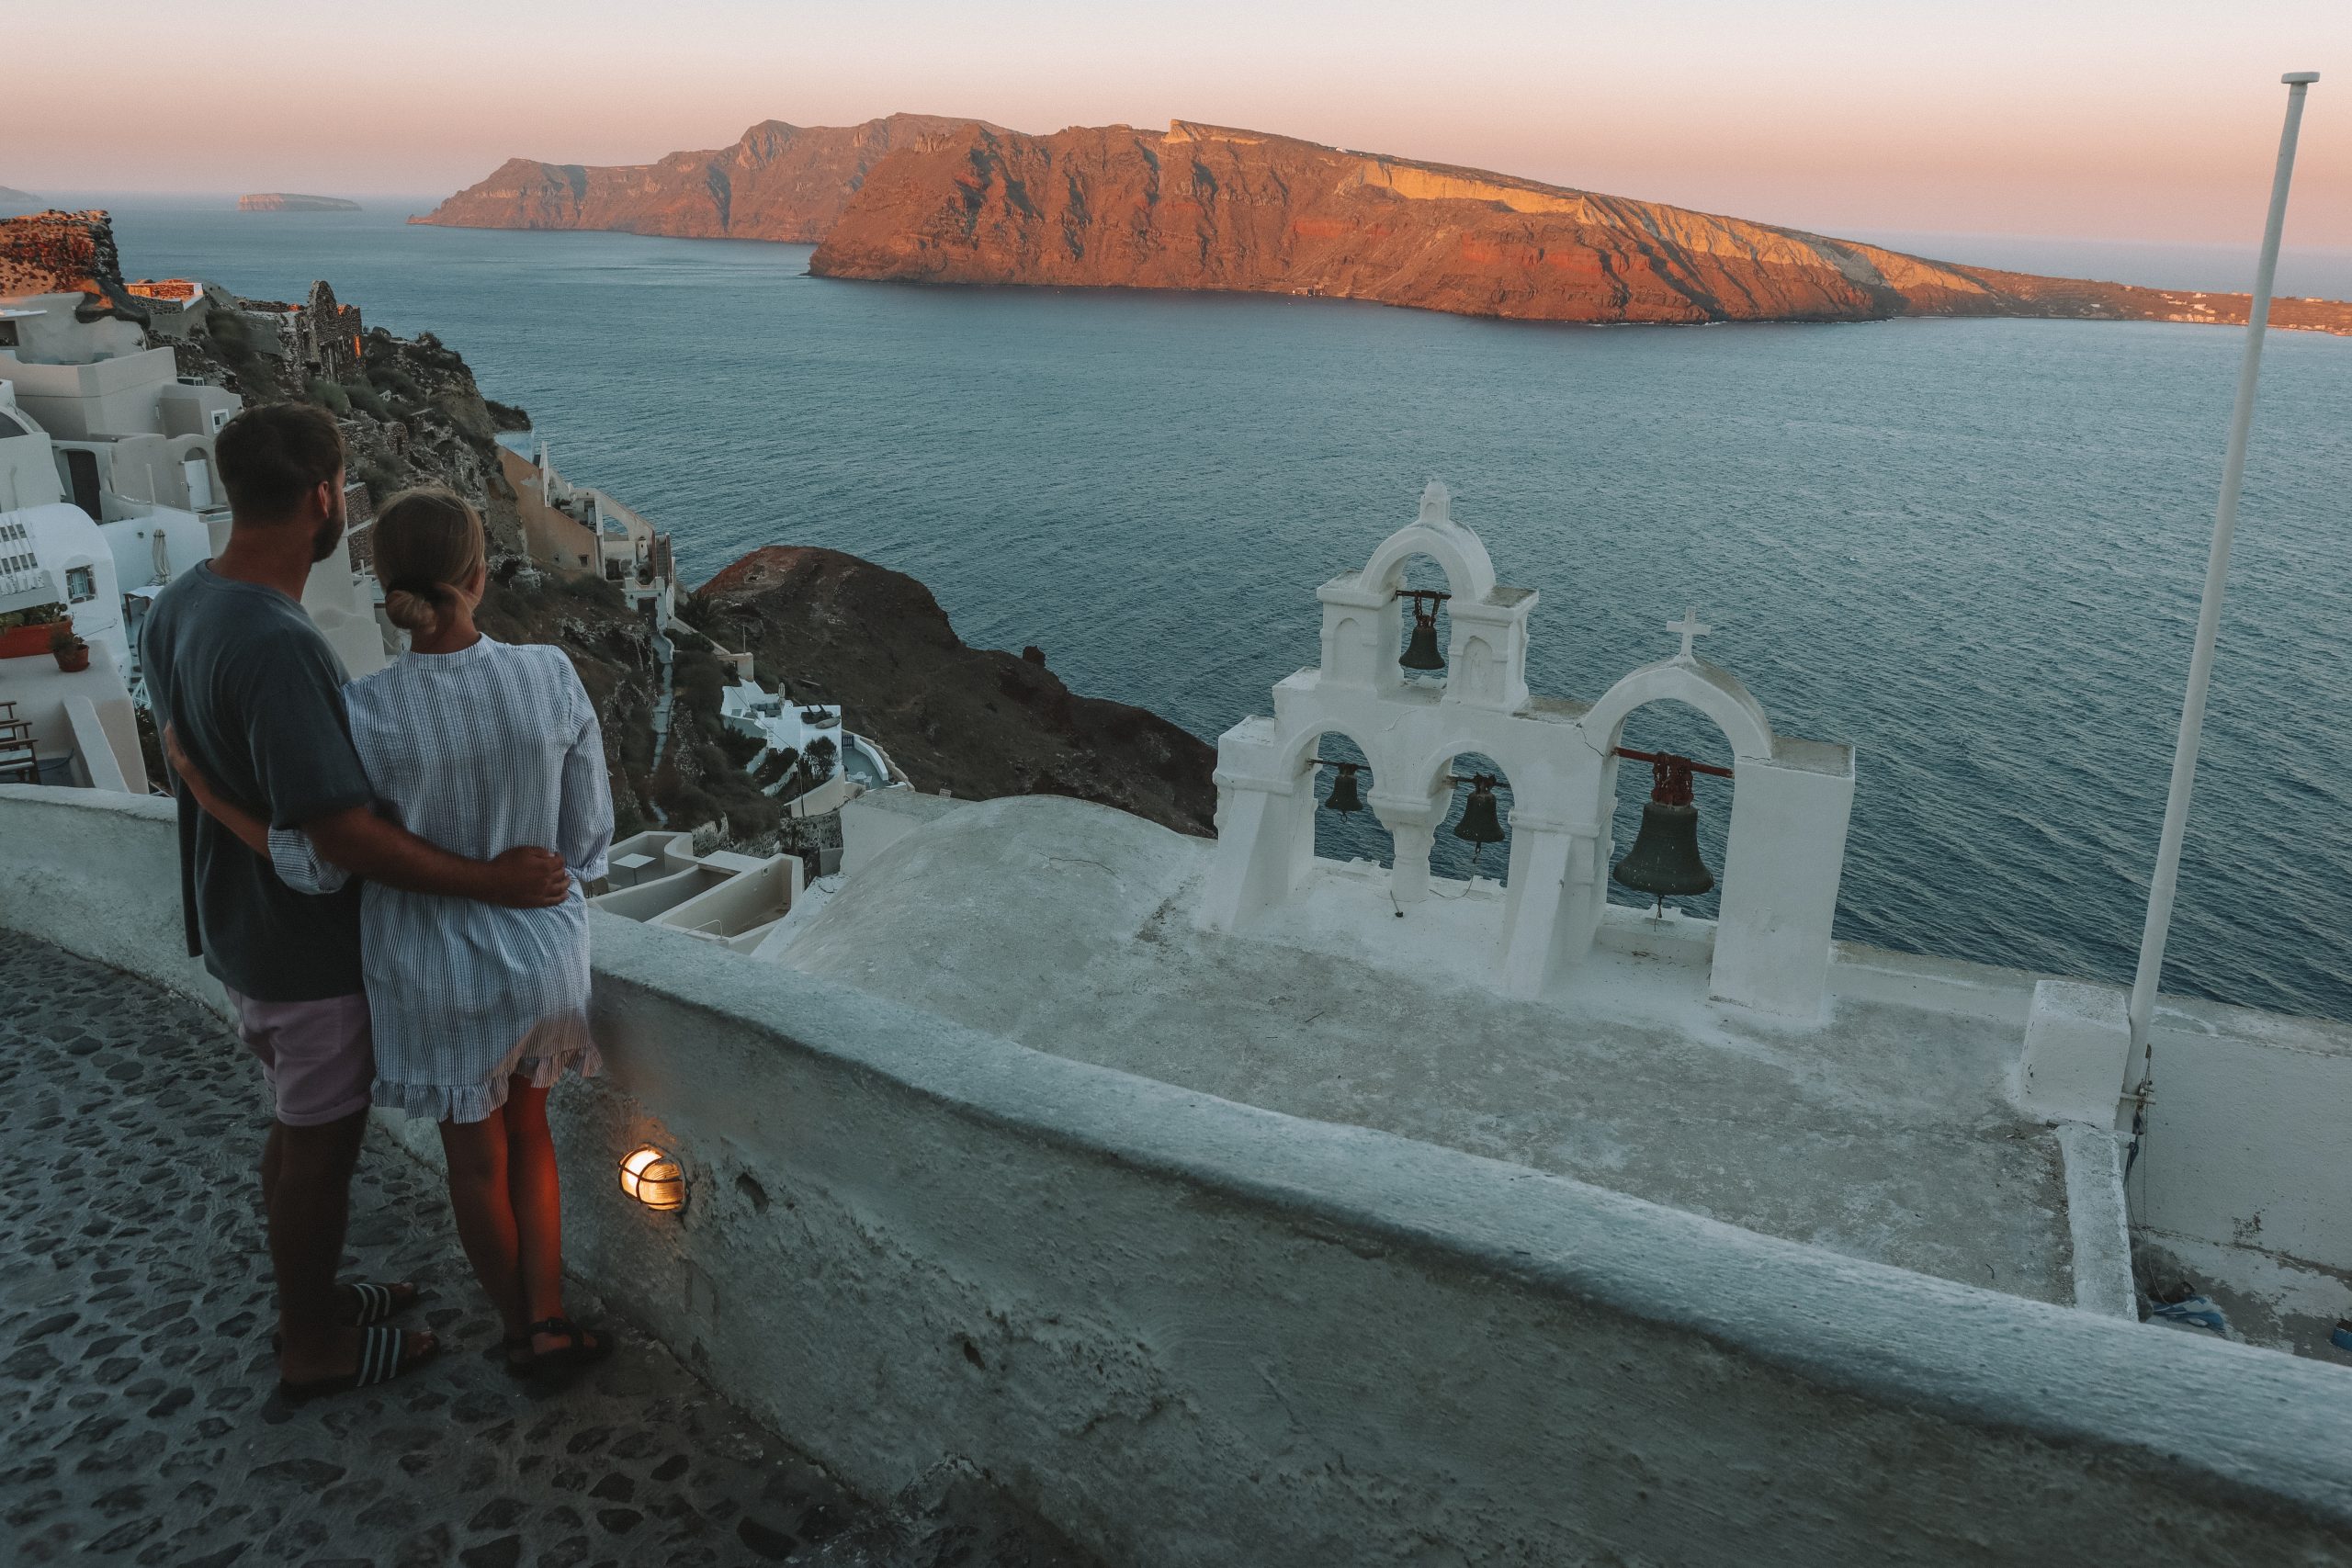 Santorini church bells with a view of nearby islands